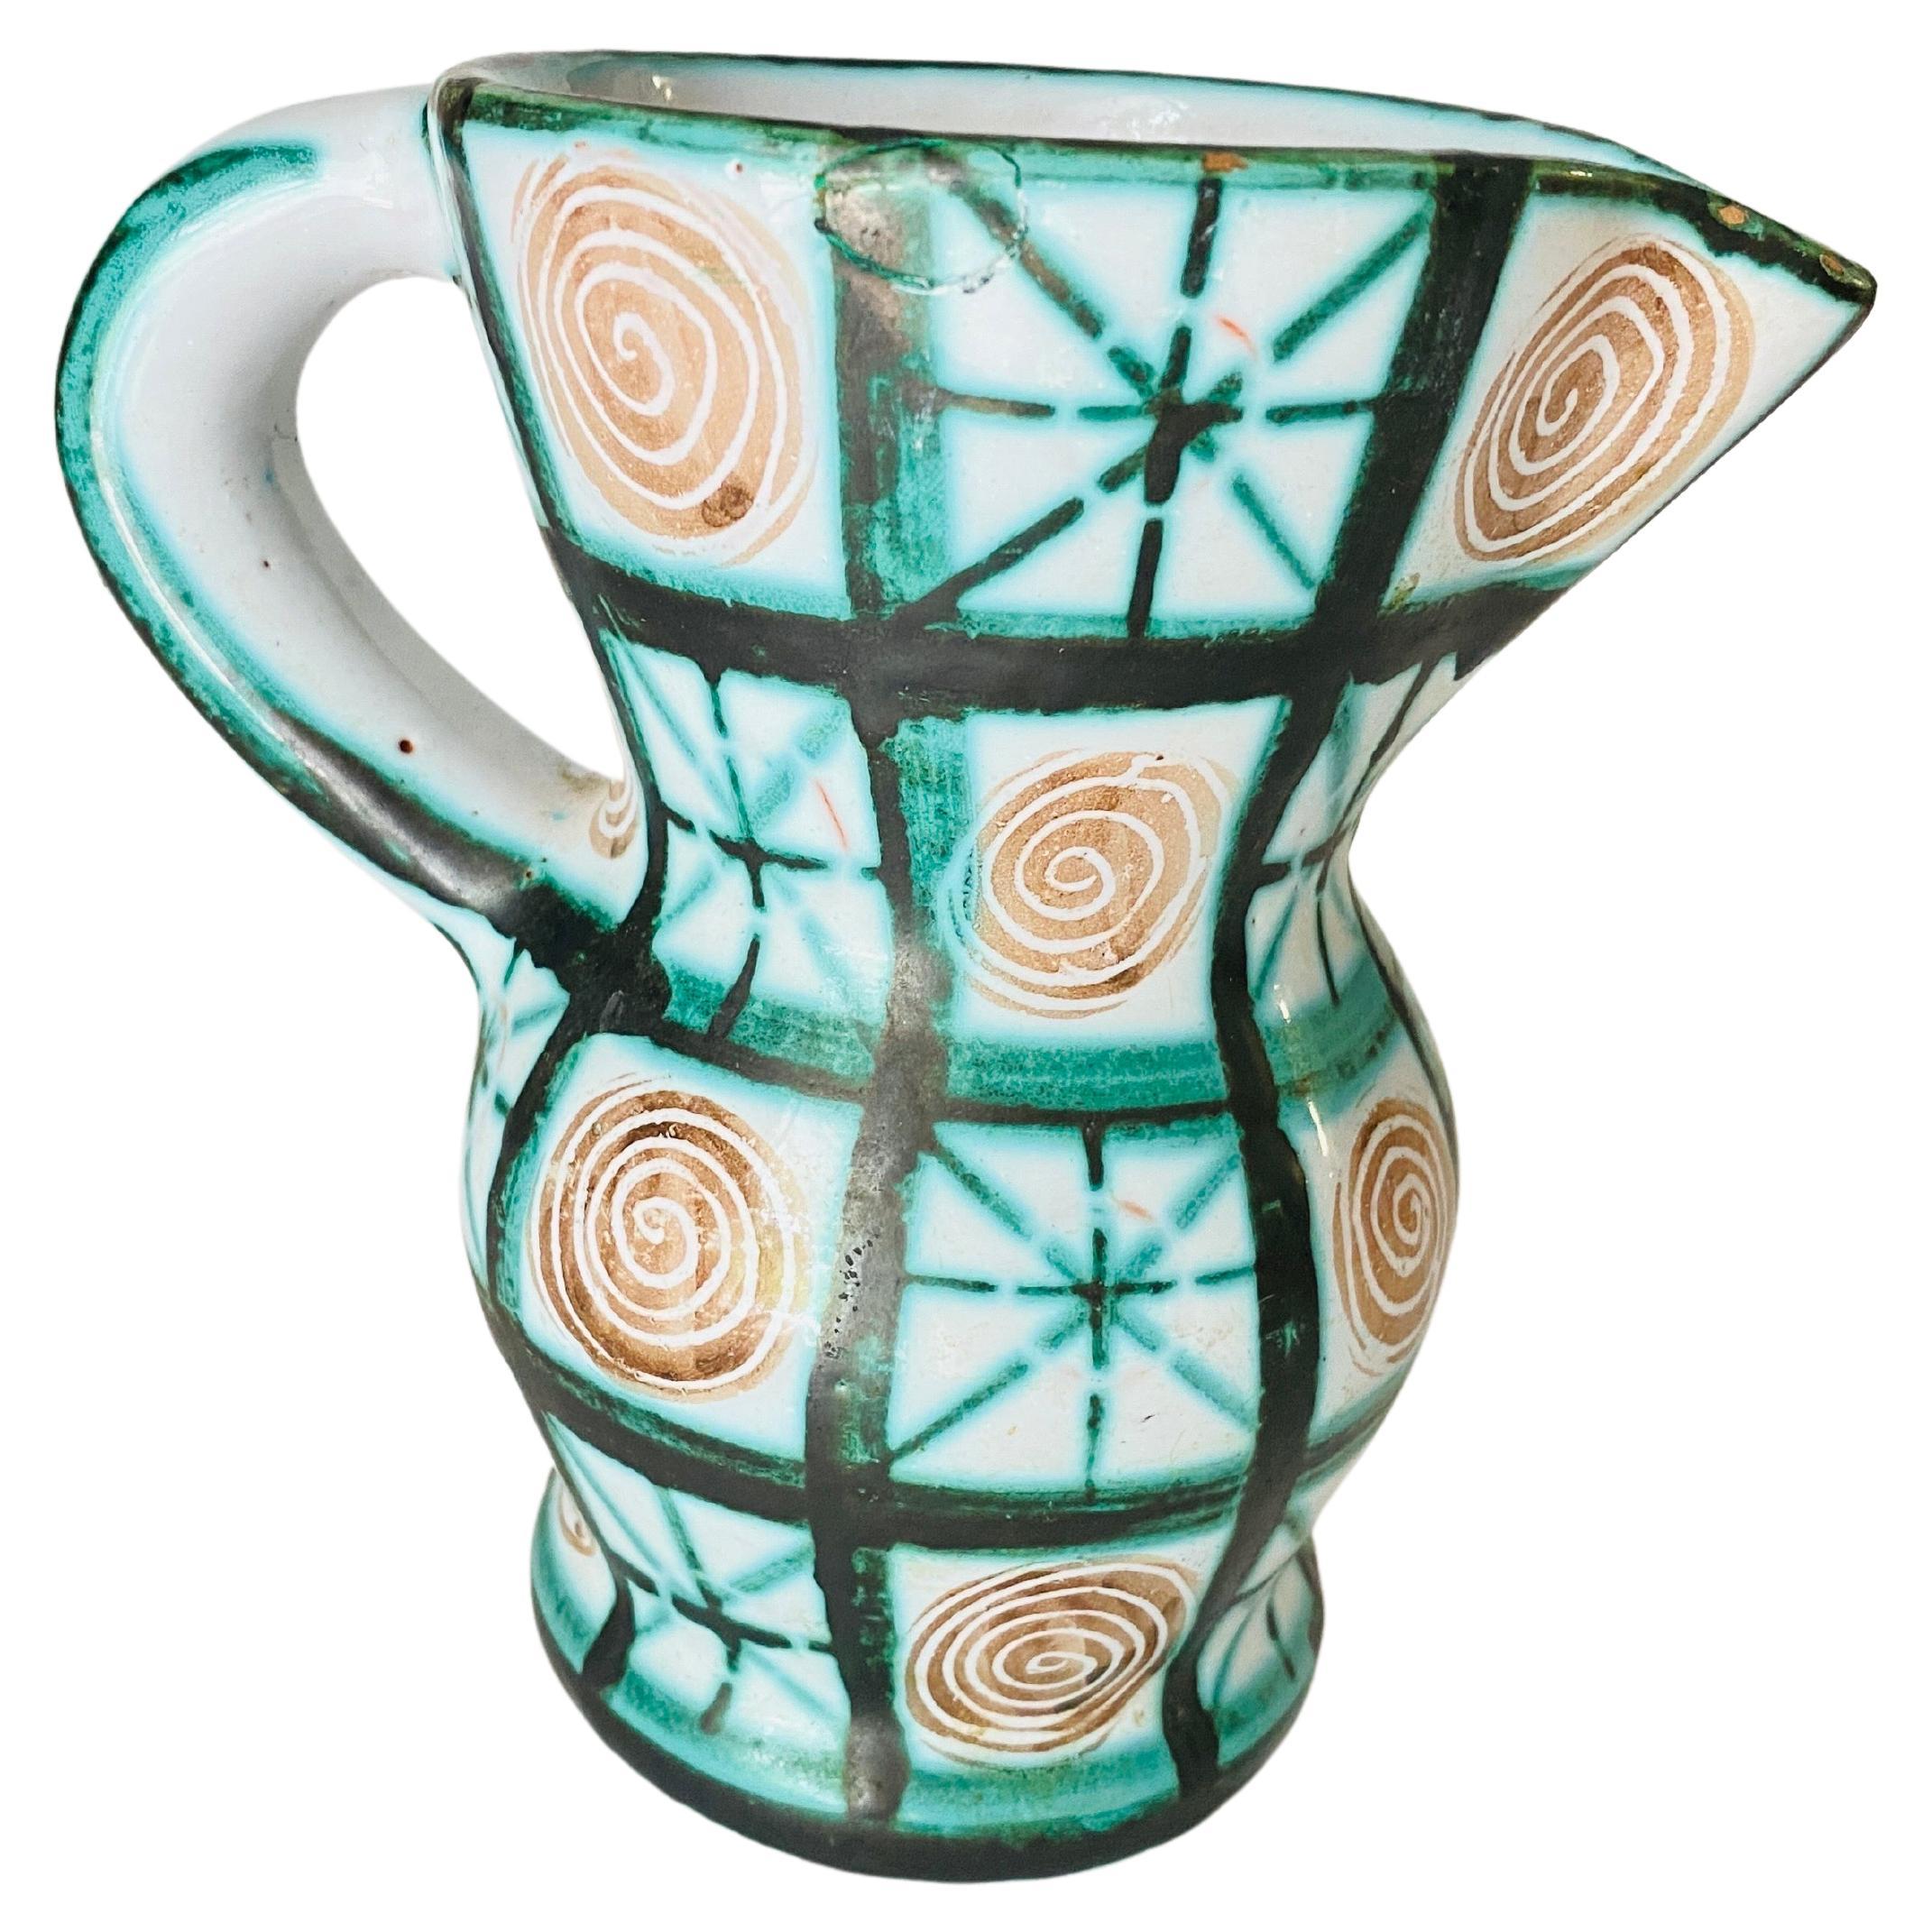 Beautiful hand painted Pitcher by Robert Picault from France, 1960's. White glaze with green and brown painted zig-zag motif. With handle. Beautiful shelf accessory. Signed.